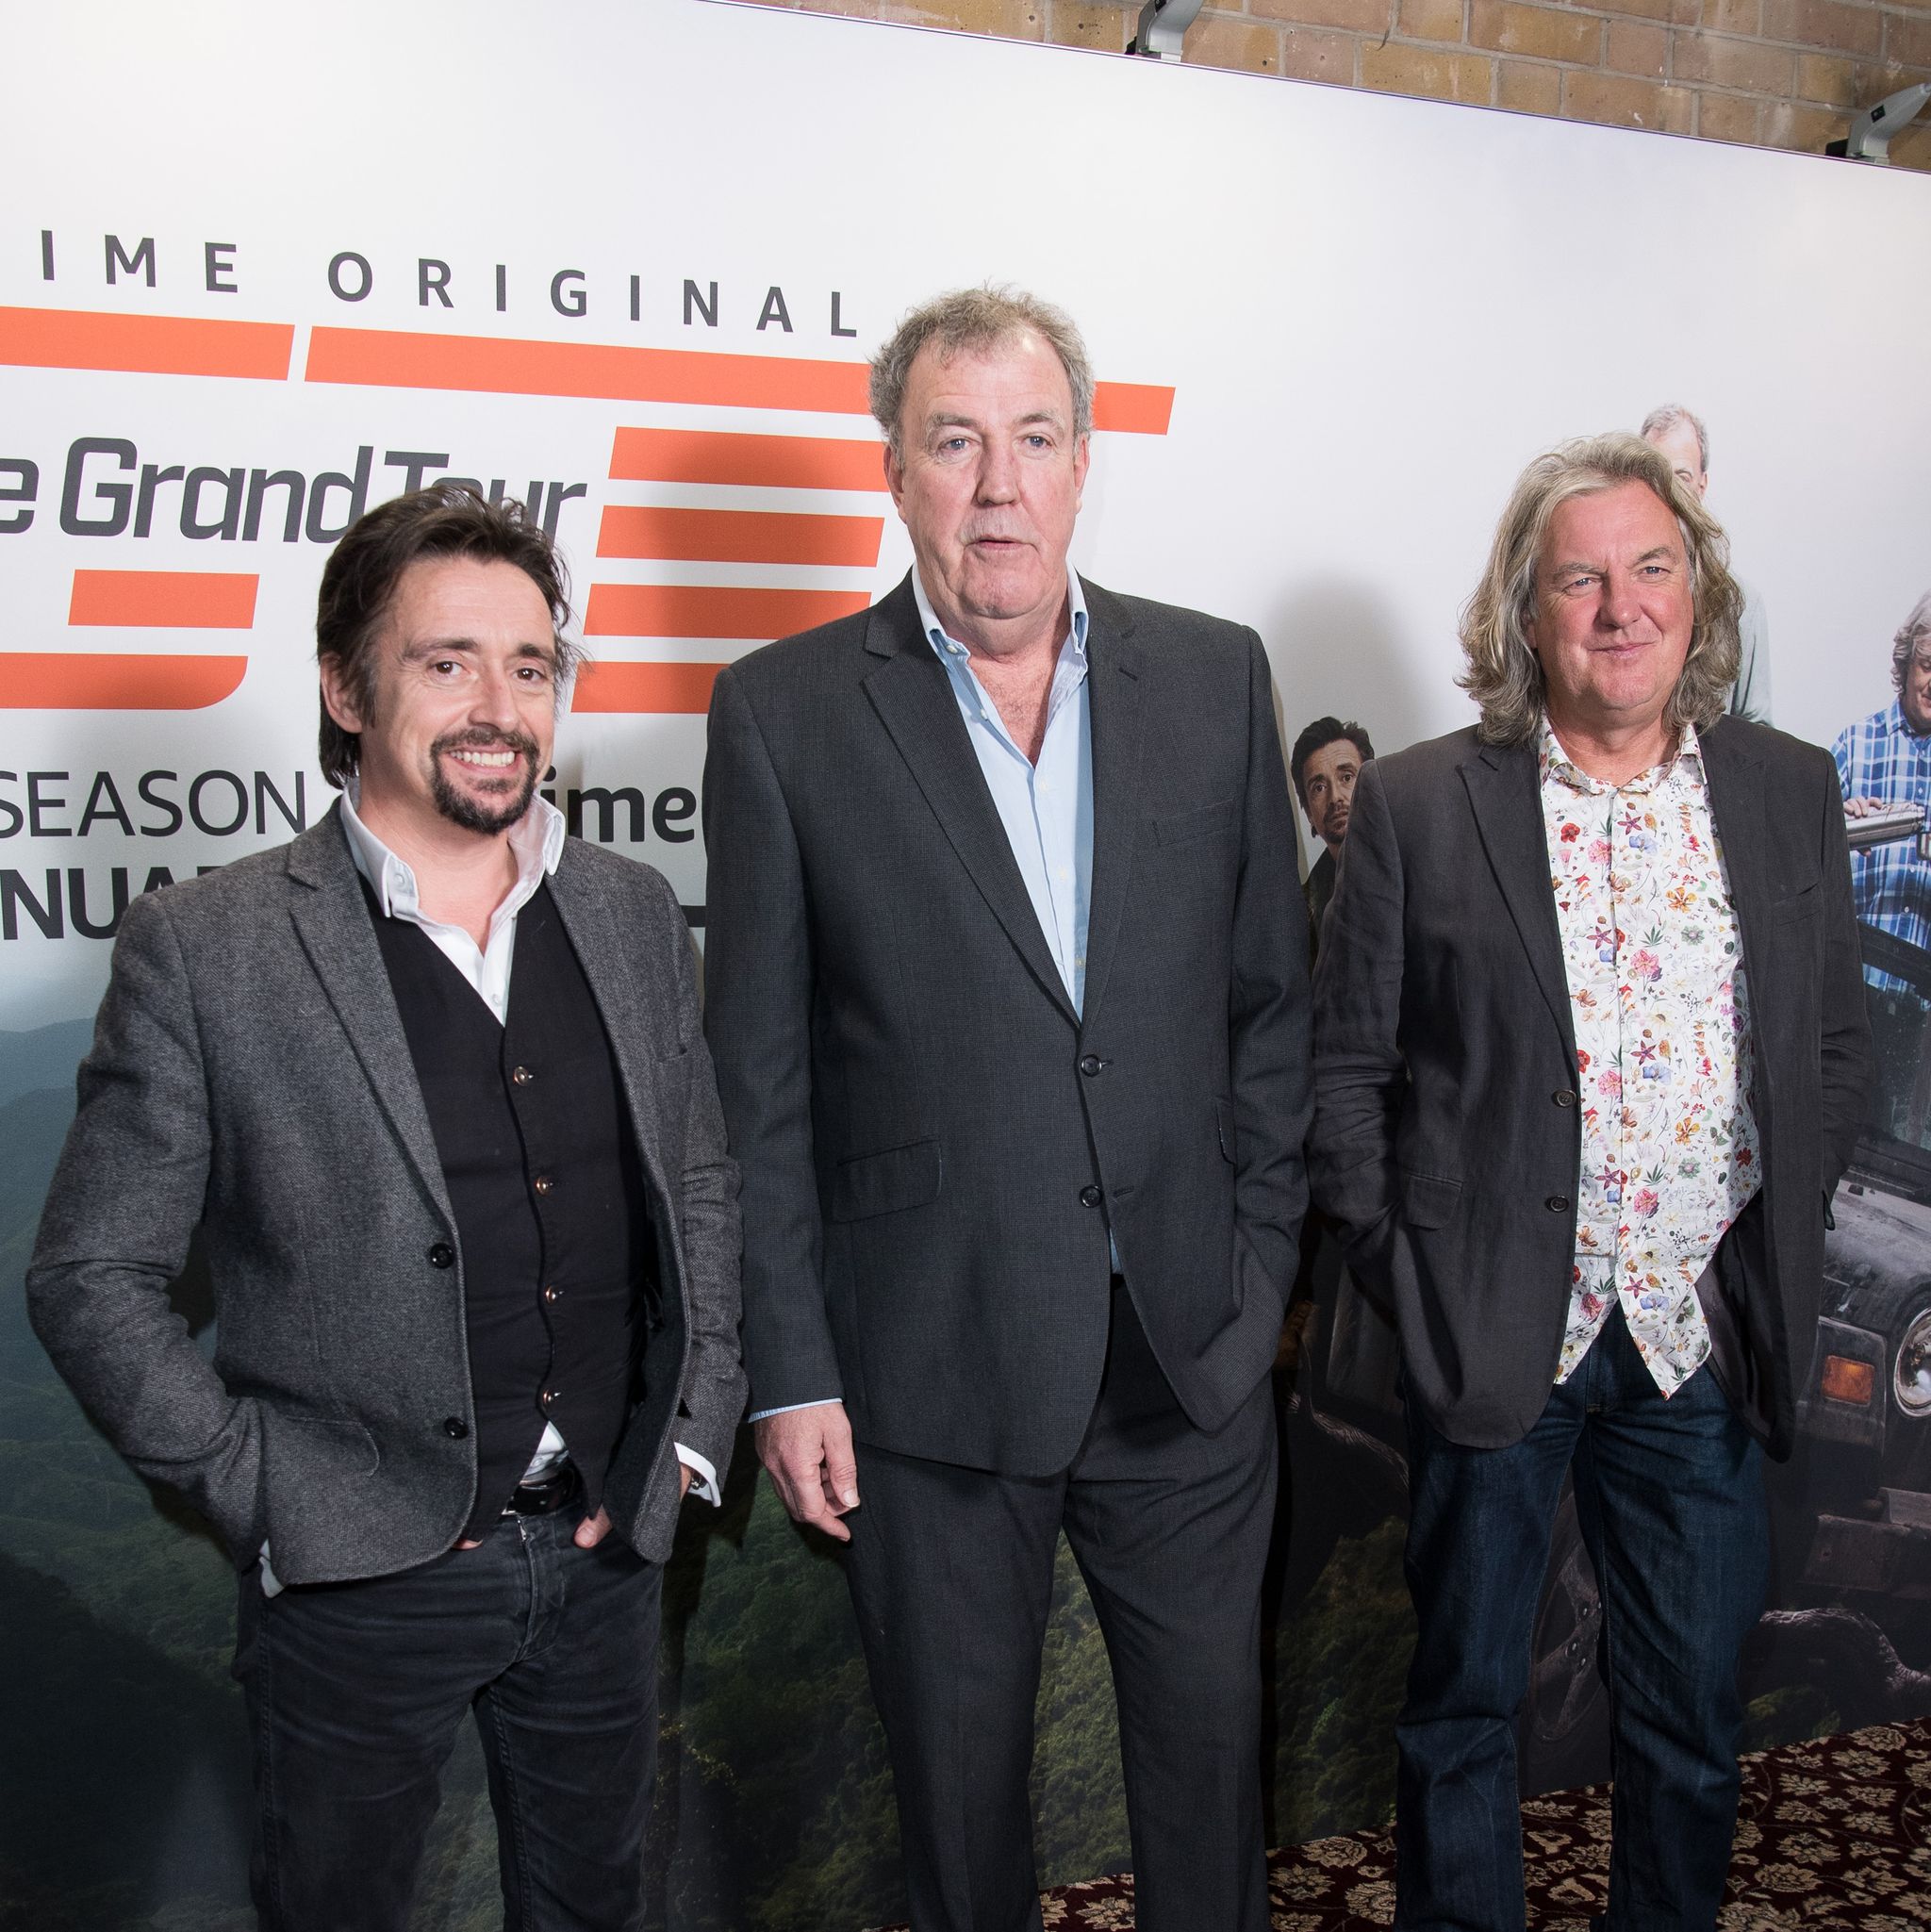 The Grand Tour's Jeremy Clarkson shares season 4 filming pictures